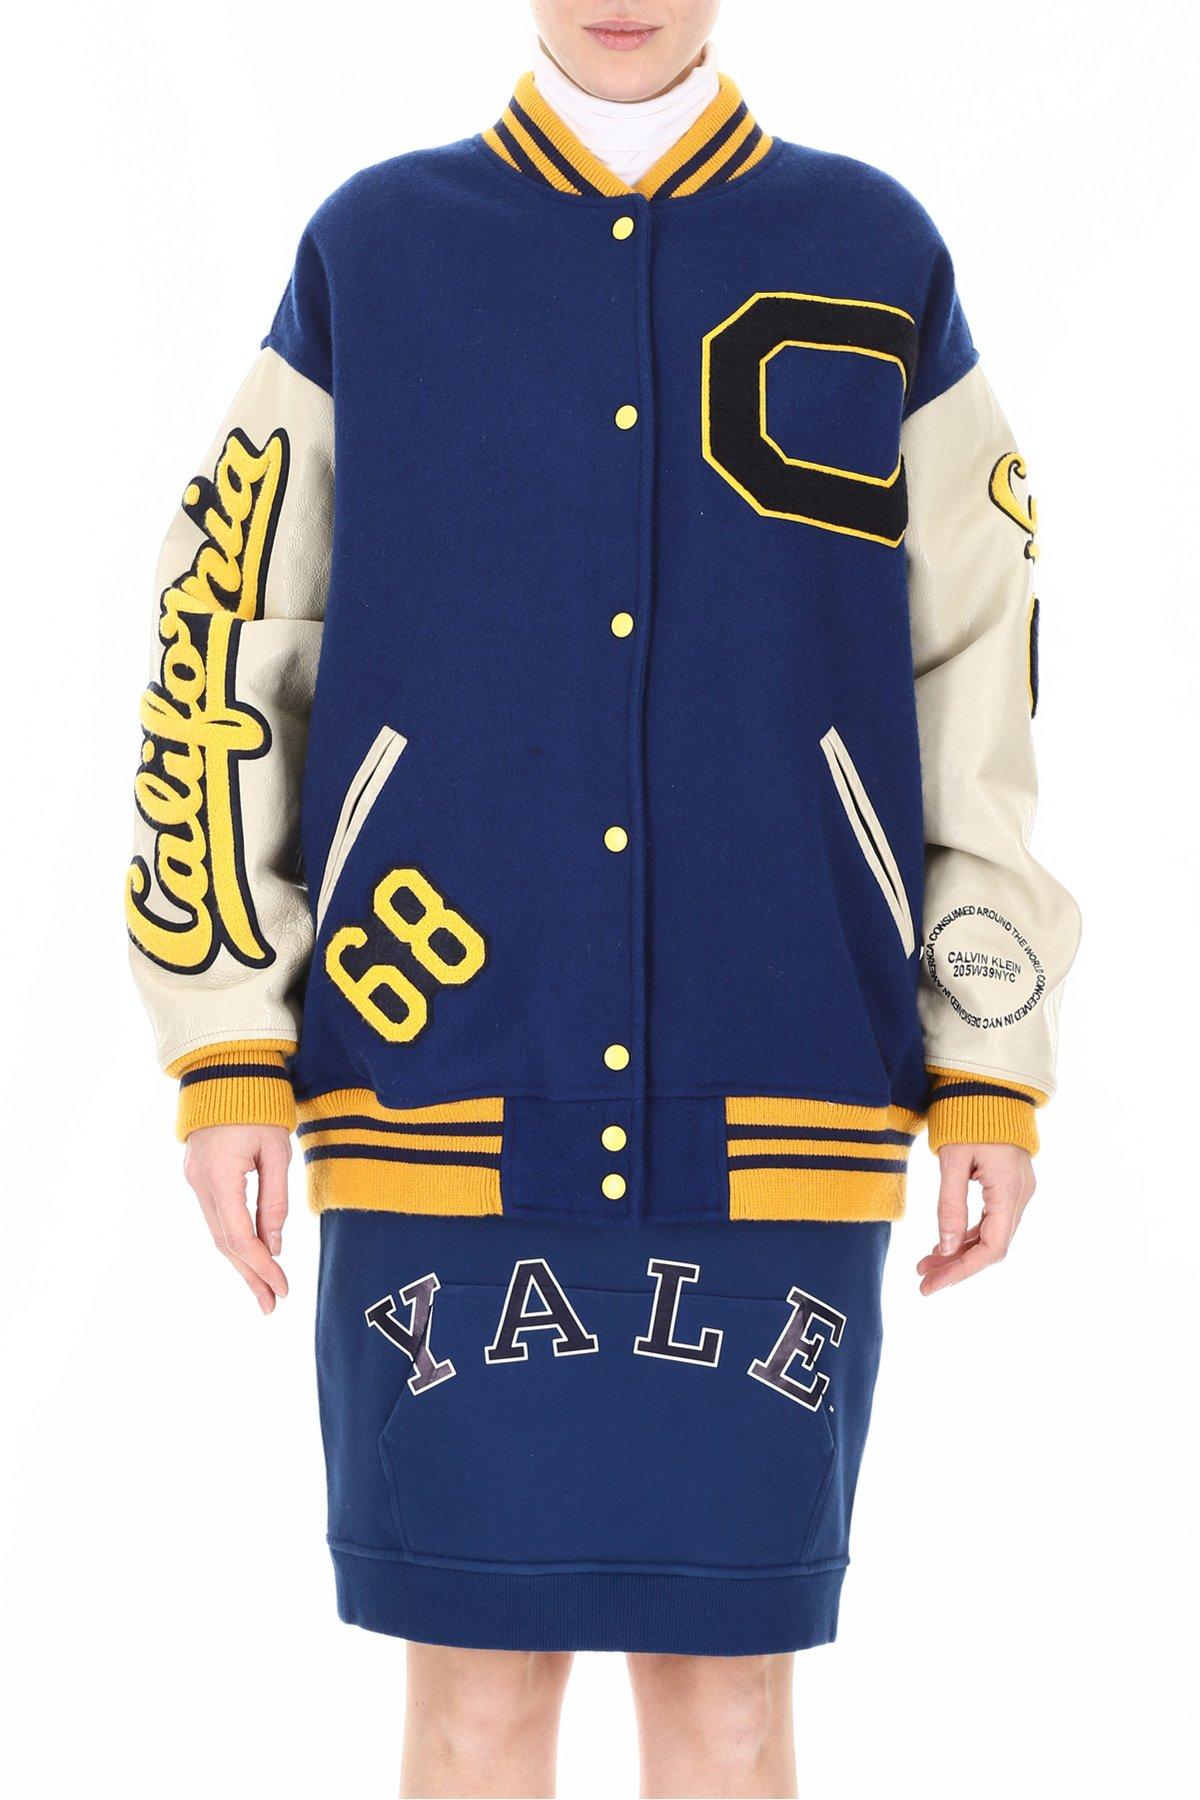 CALVIN KLEIN 205W39NYC Cotton Contrast Patches Varsity Bomber Jacket in  Blue Ice (Blue) | Lyst